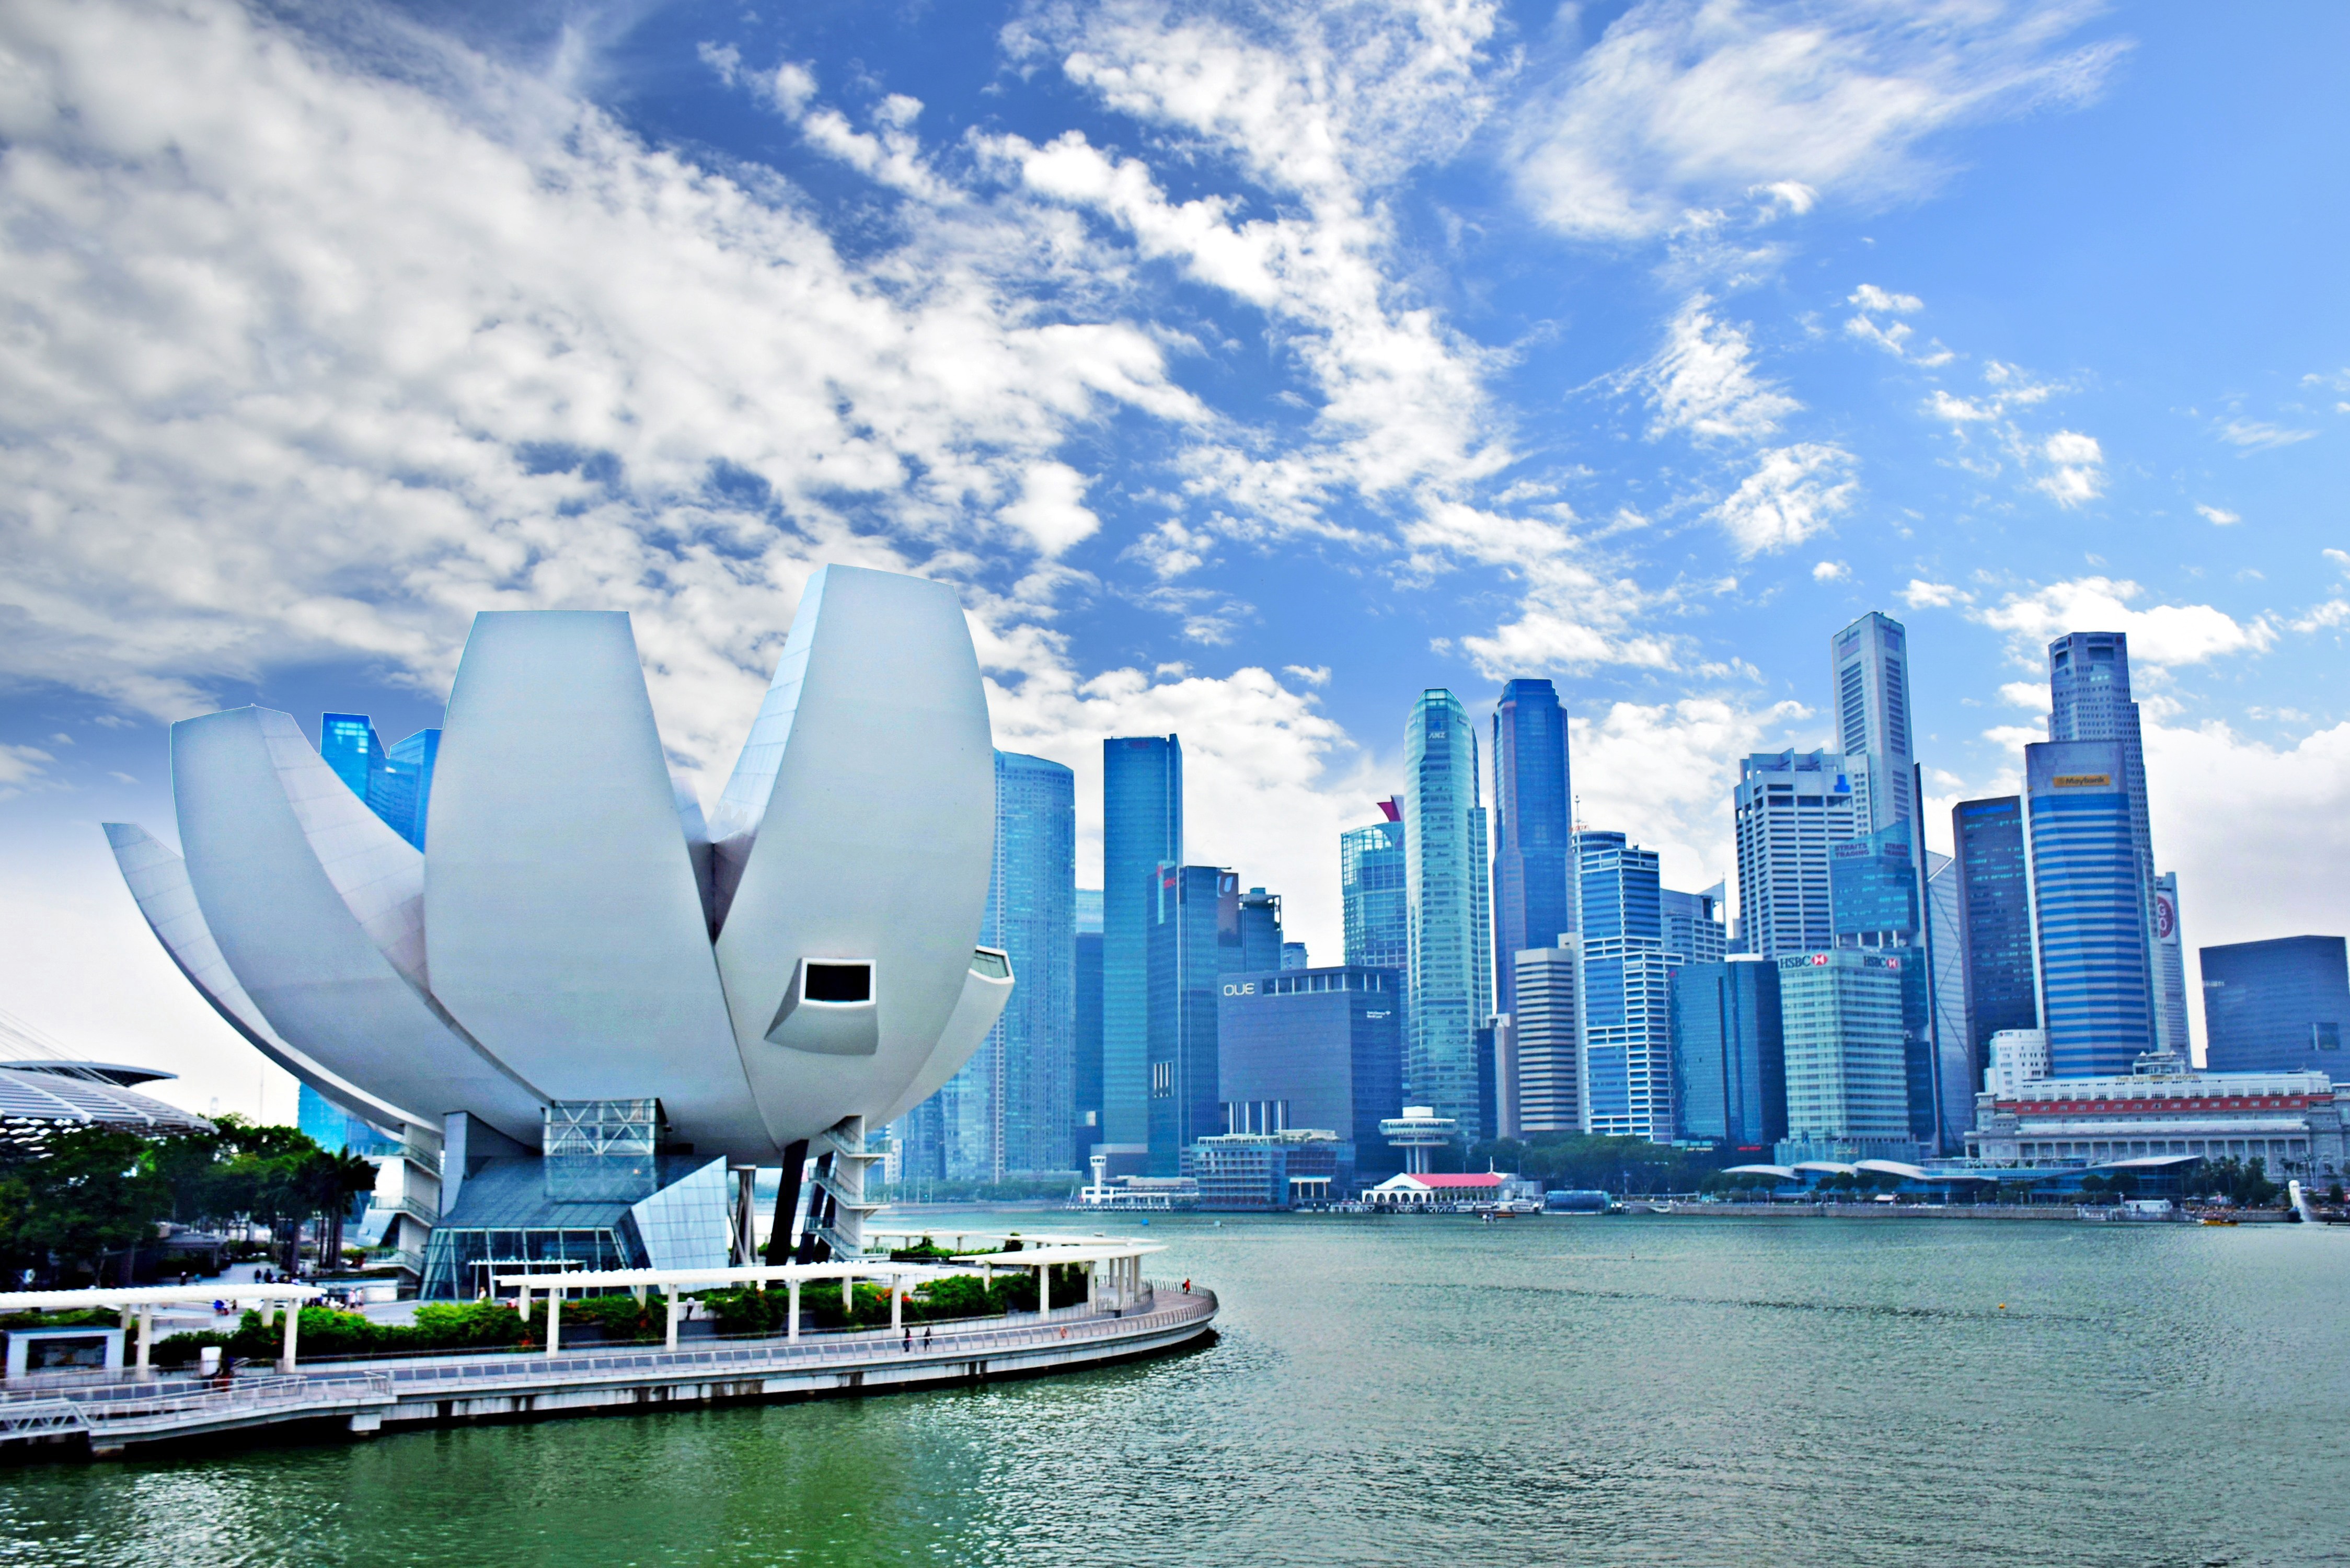 The image shows a scene of Singapur with the museum of Arts and Sciences in the shape of a lotus blossom